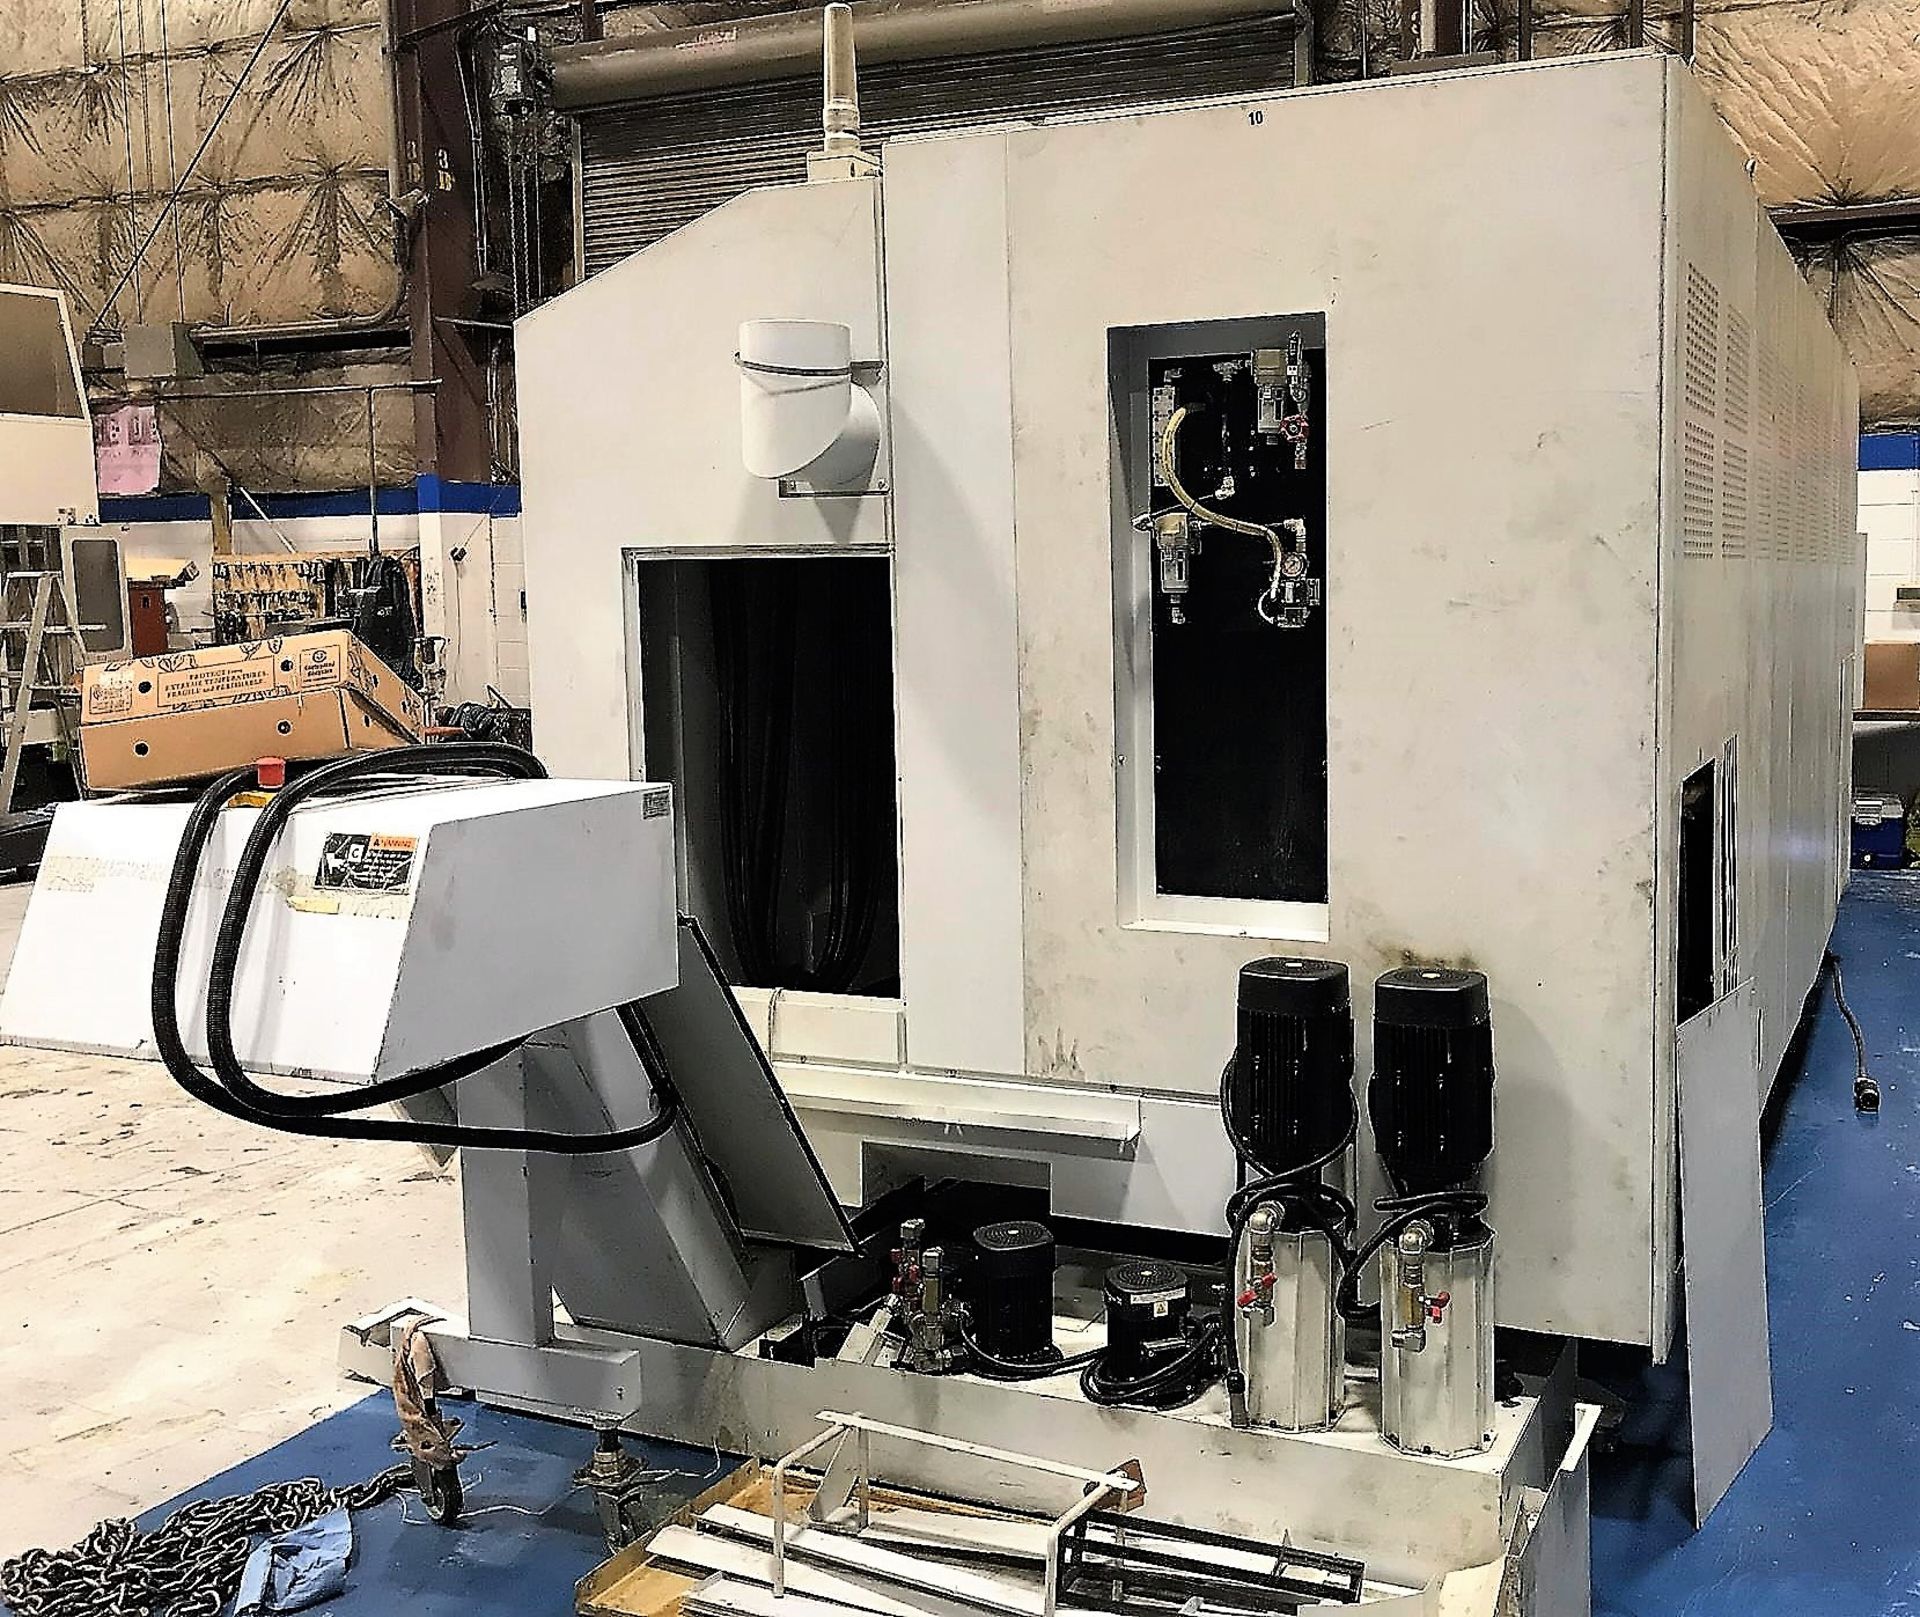 16.5" x 120" Mori Seiki NL3000Y/3000 CNC Turning Center Lathe w/Milling & Y-Axis, S/N 11986, New 201 - Image 10 of 17